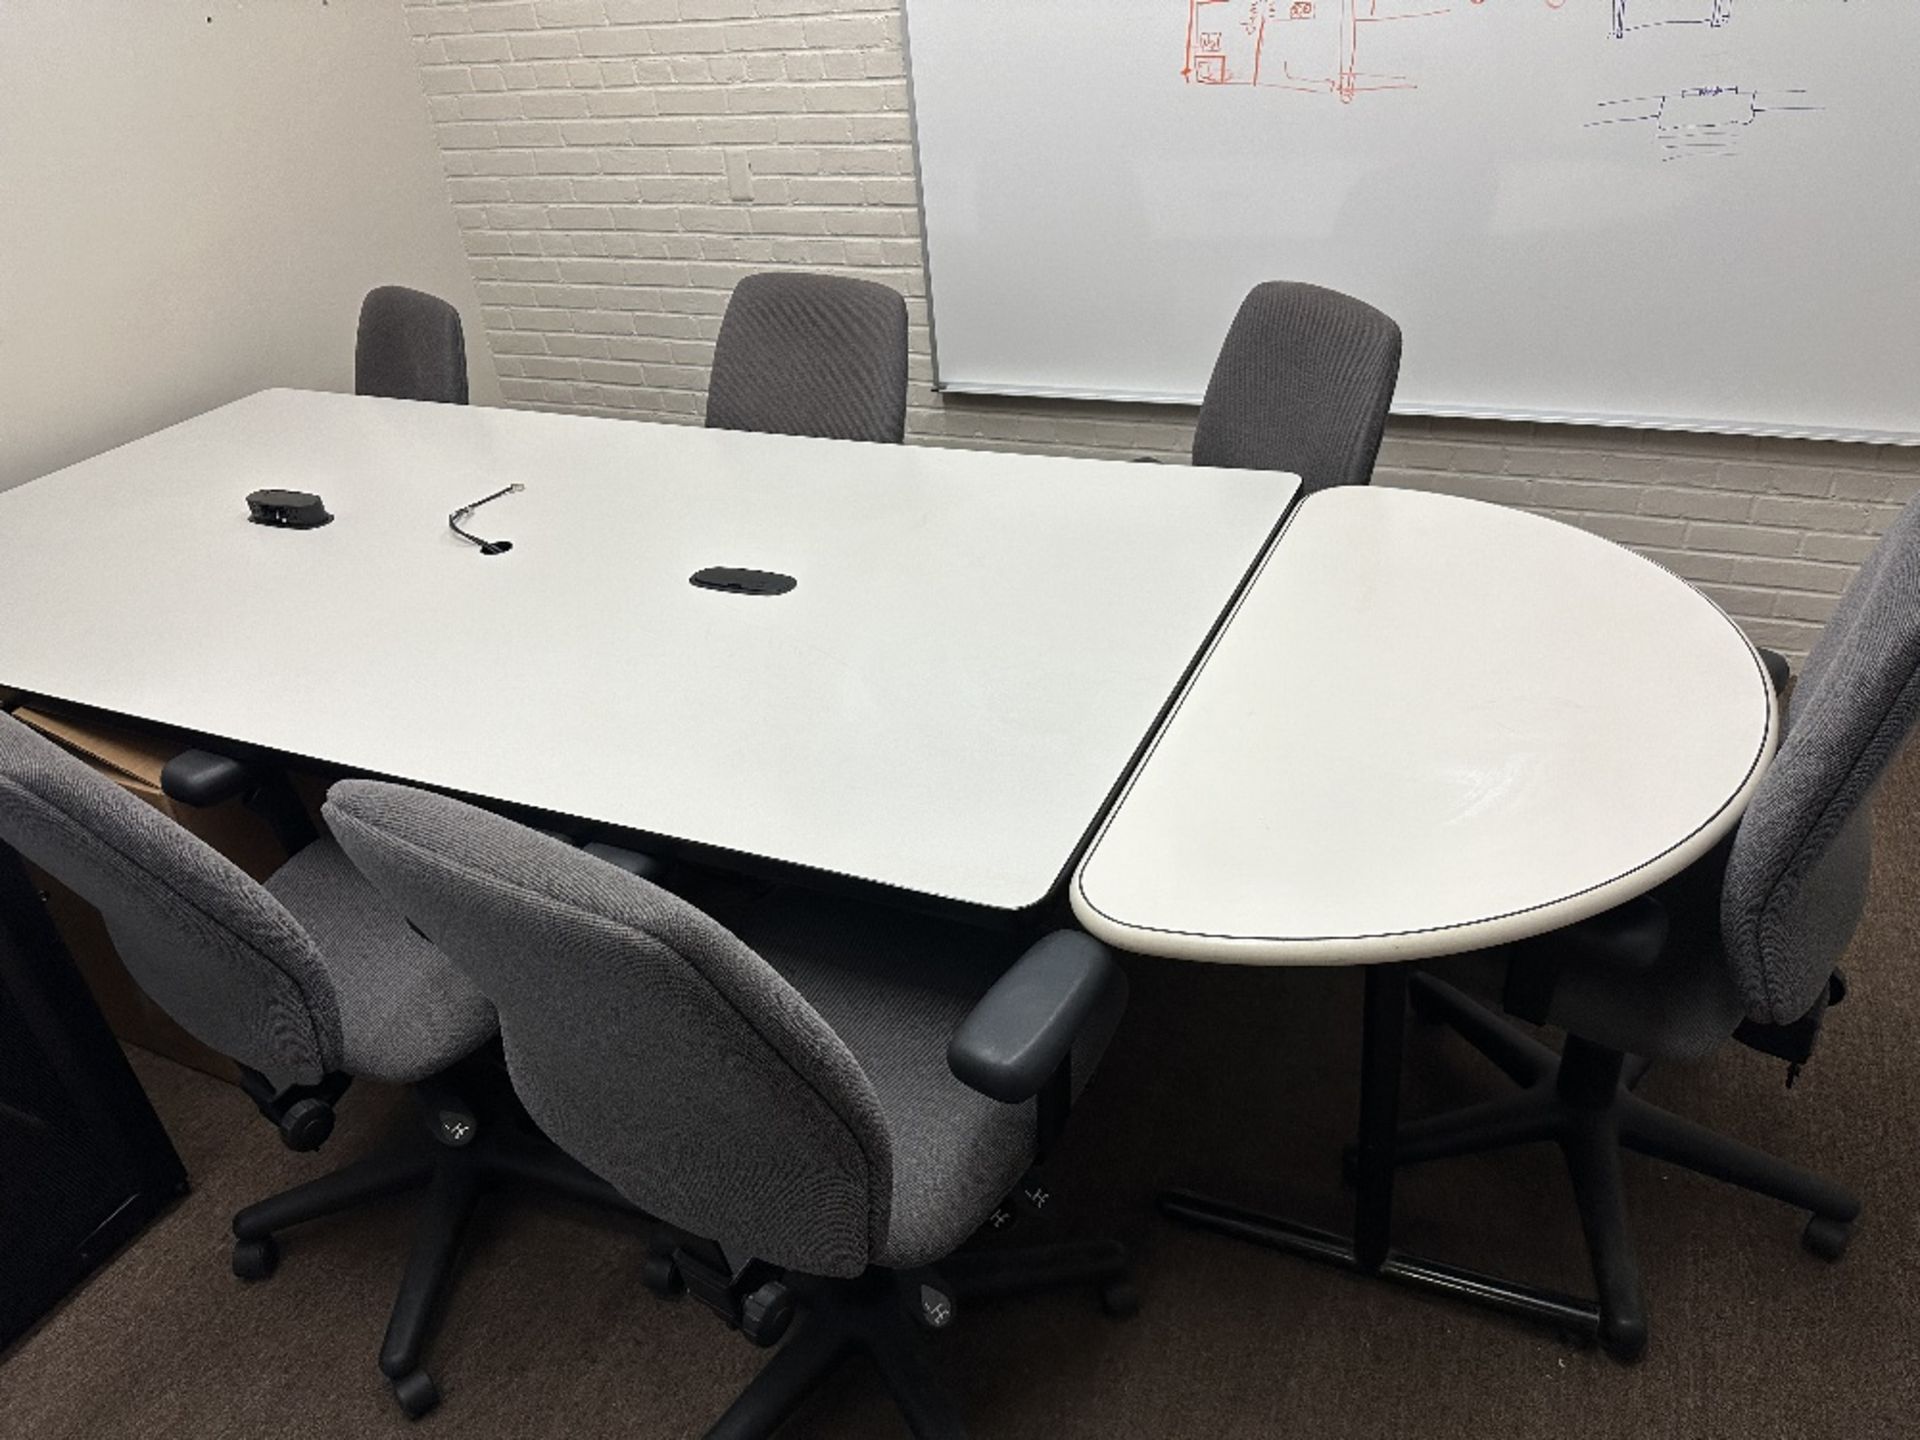 Lot: Confrence Table w 6 Armed Rolling Chairs (LOCATED IN MIDDLETOWN, N.Y.)-FOR PACKAGING & SHIPPING - Image 2 of 6